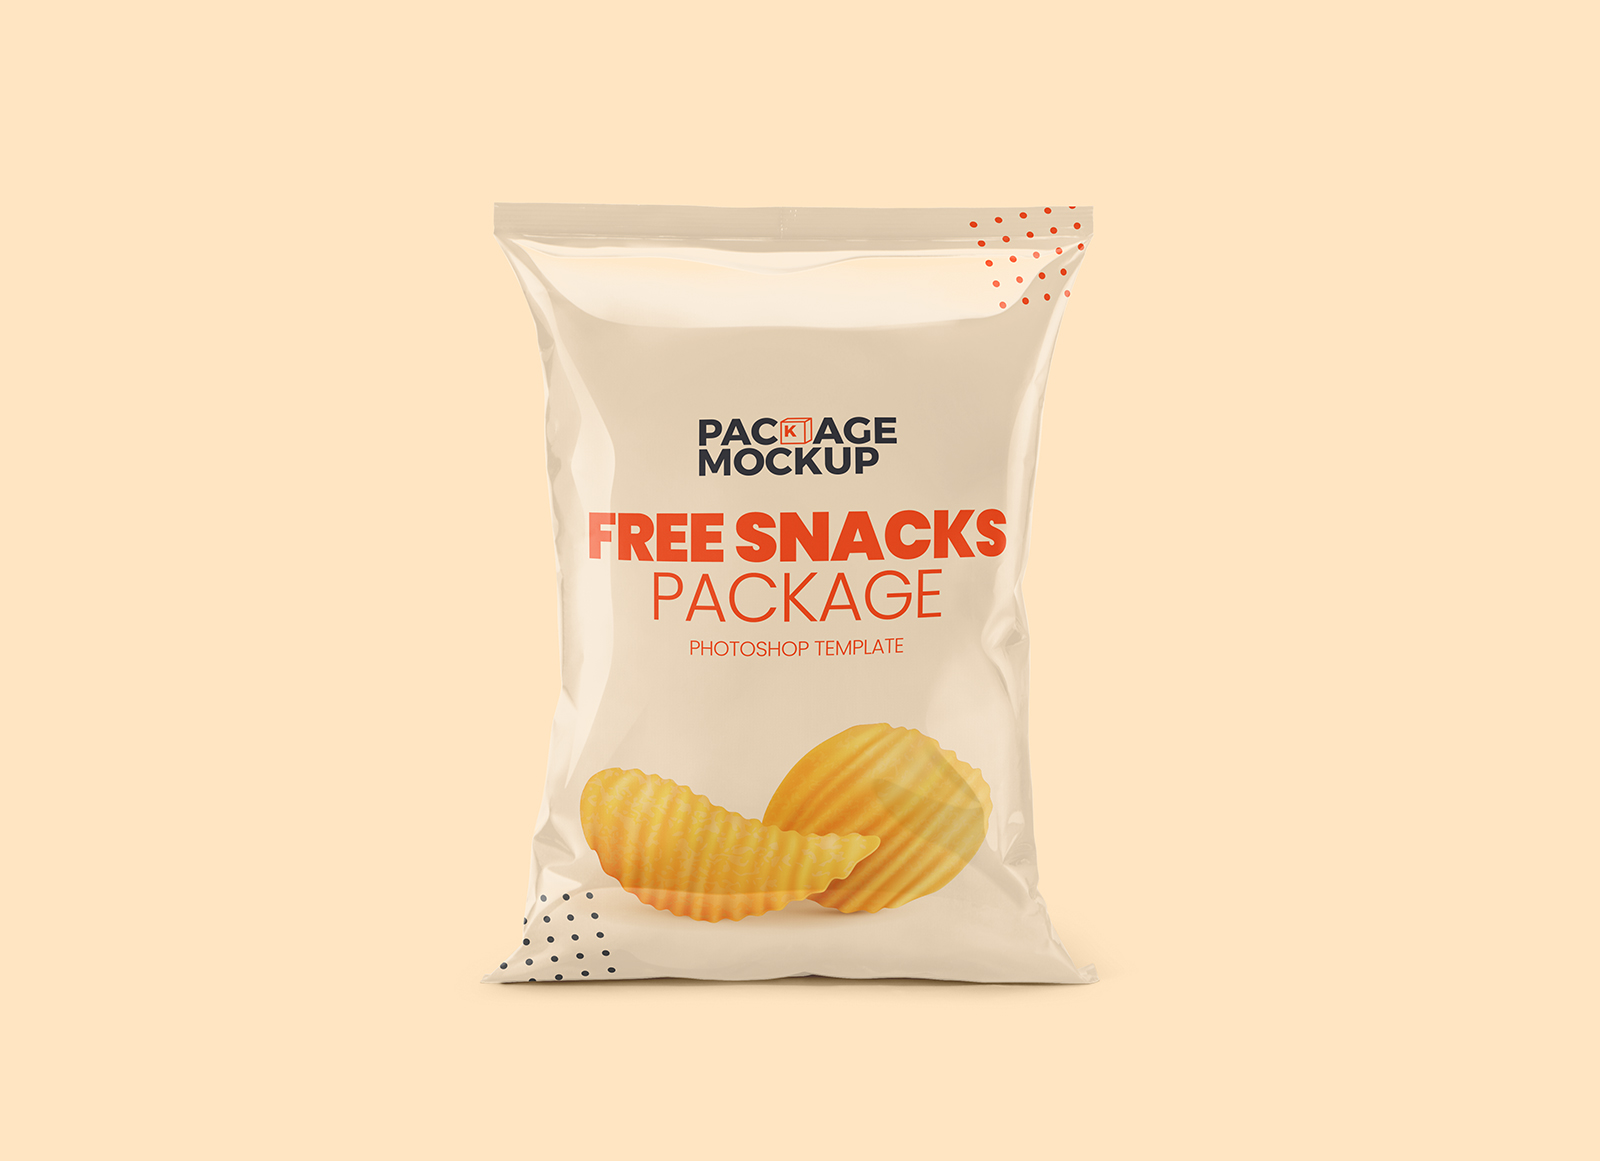 Download Chips Packaging Mockup Download Free And Premium Psd Mockup Templates And Design Assets PSD Mockup Templates